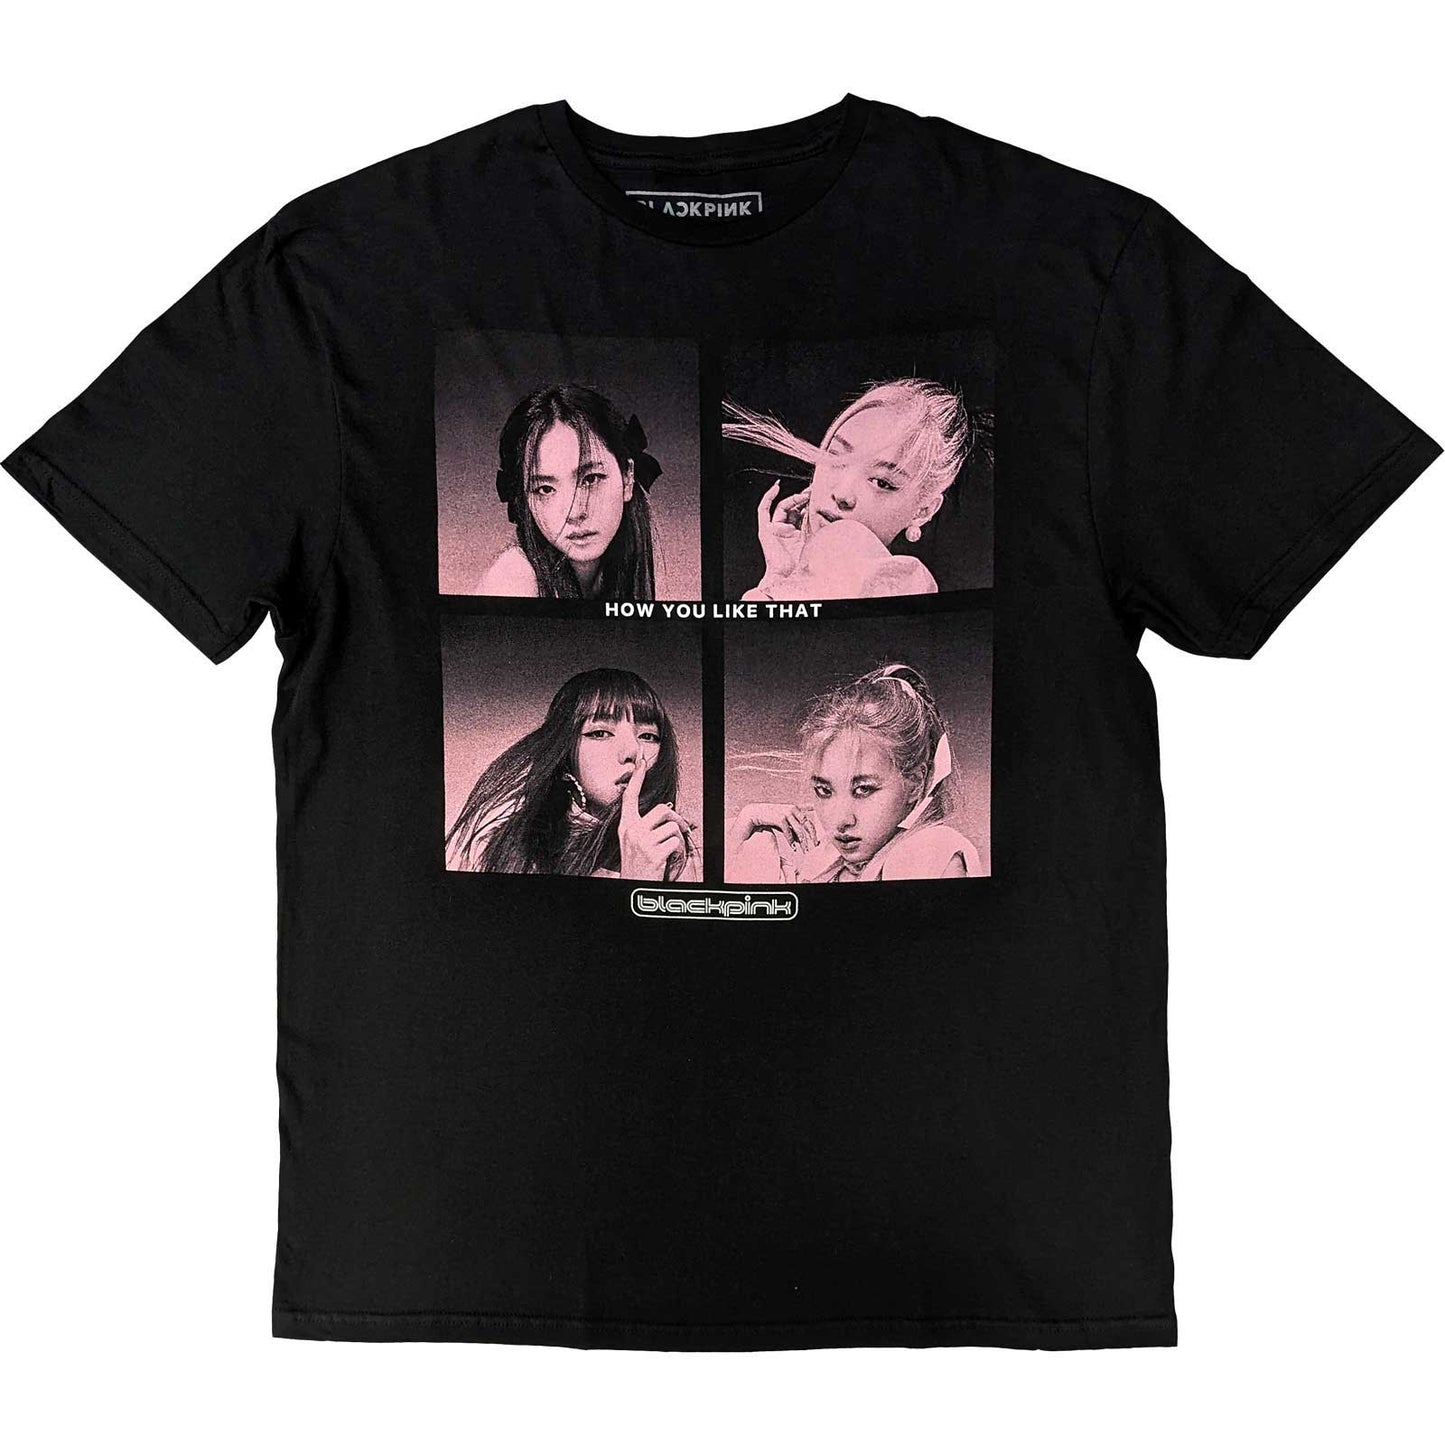 BlackPink Unisex T-Shirt: How You Like That